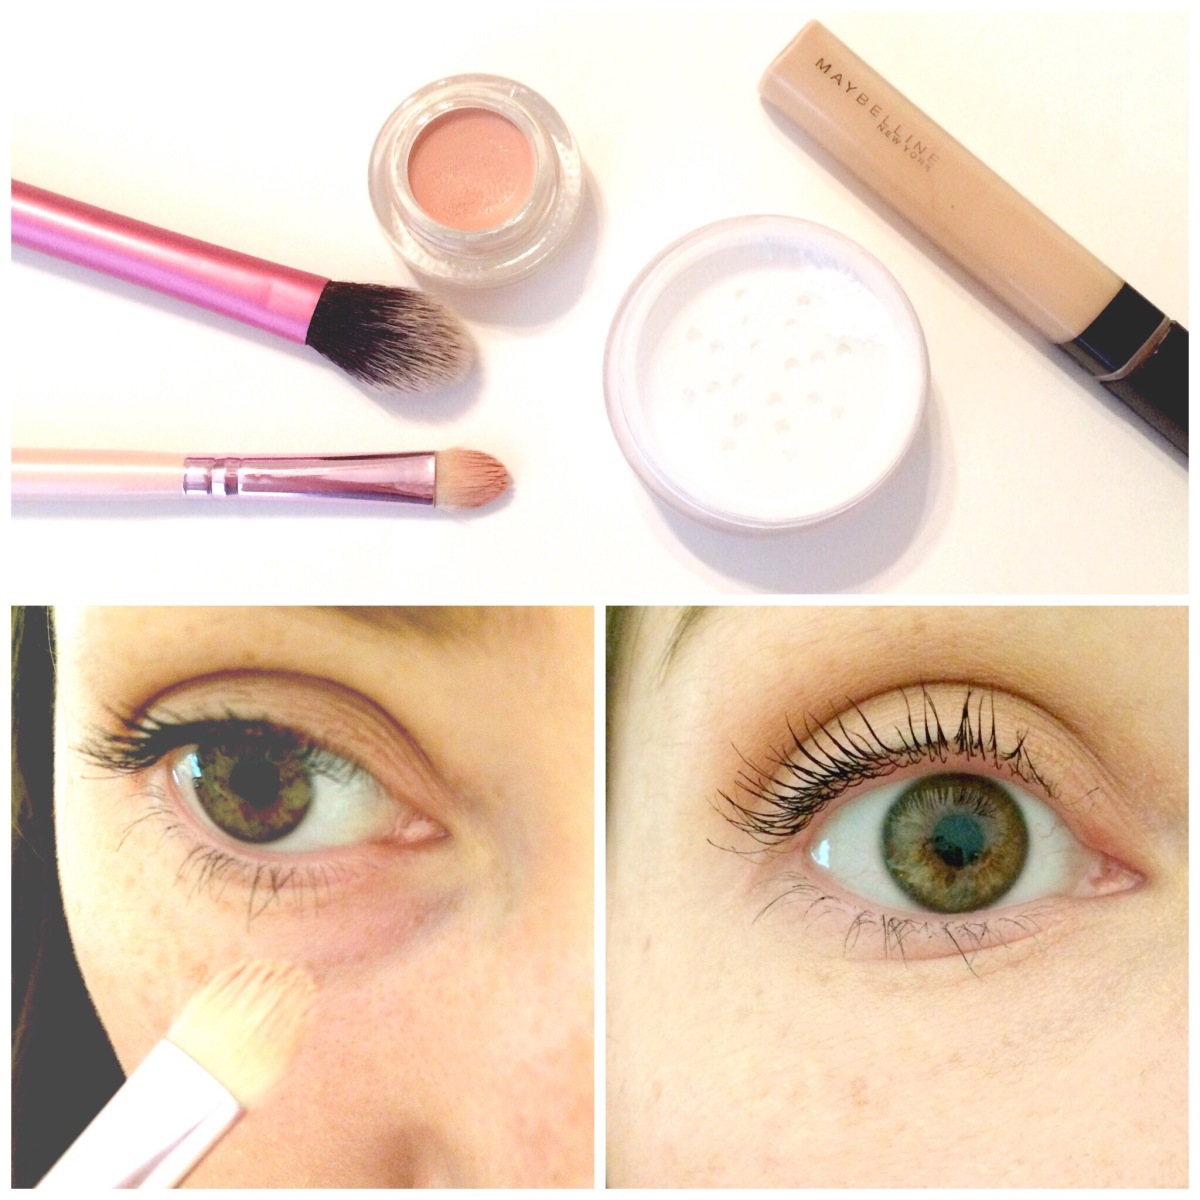 3 Steps To Brighter Eyes!